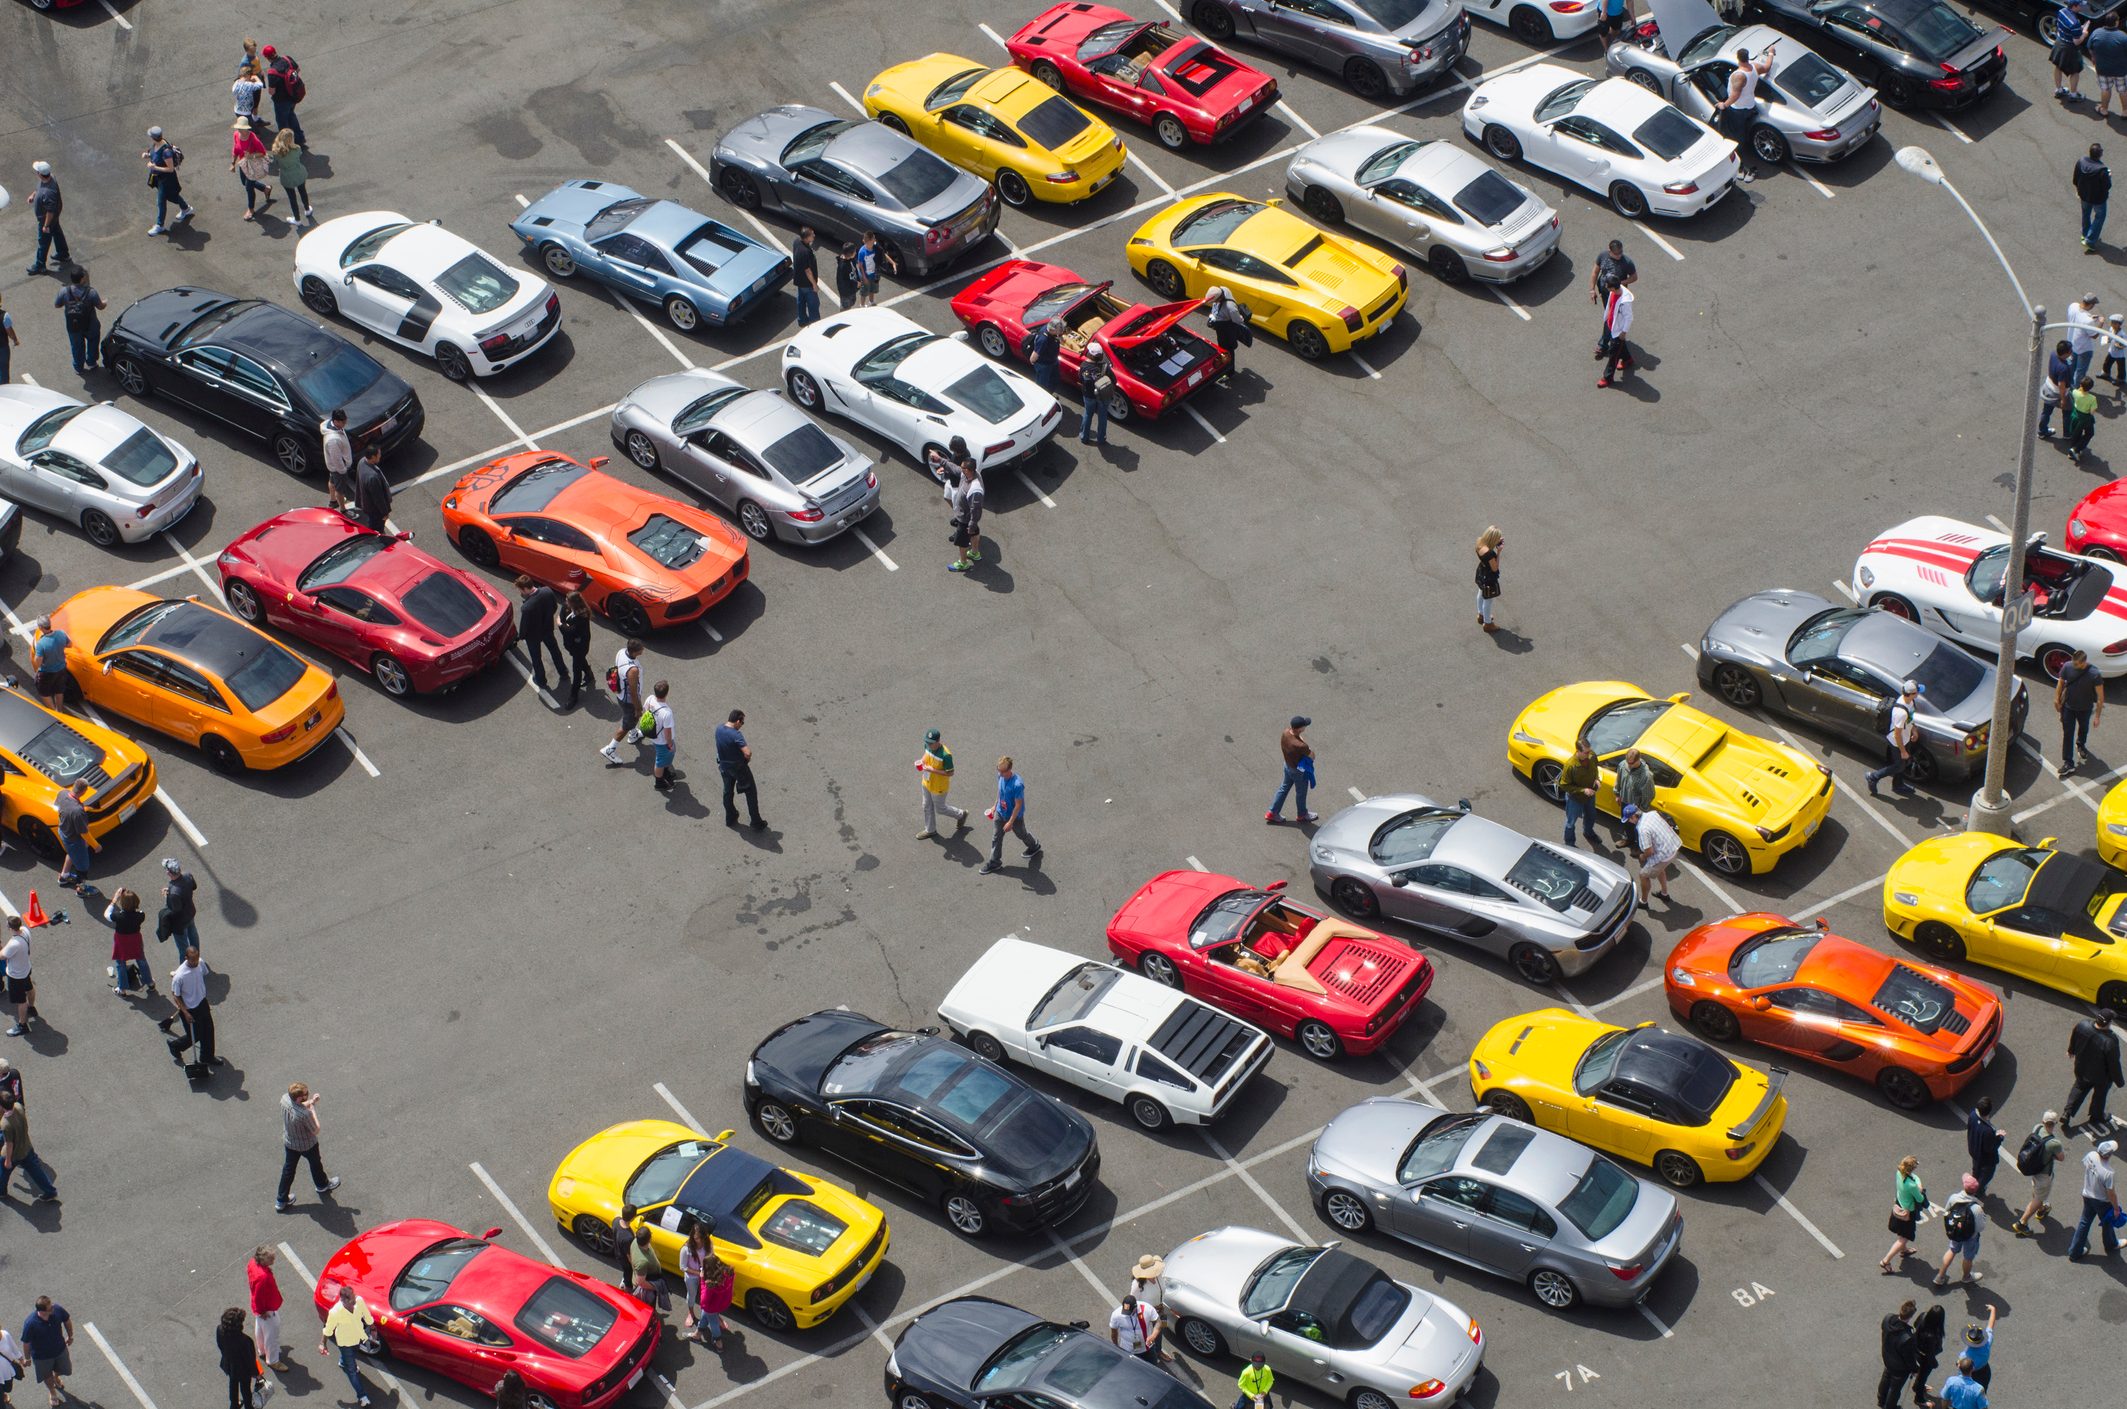 Father and children at a car show from above